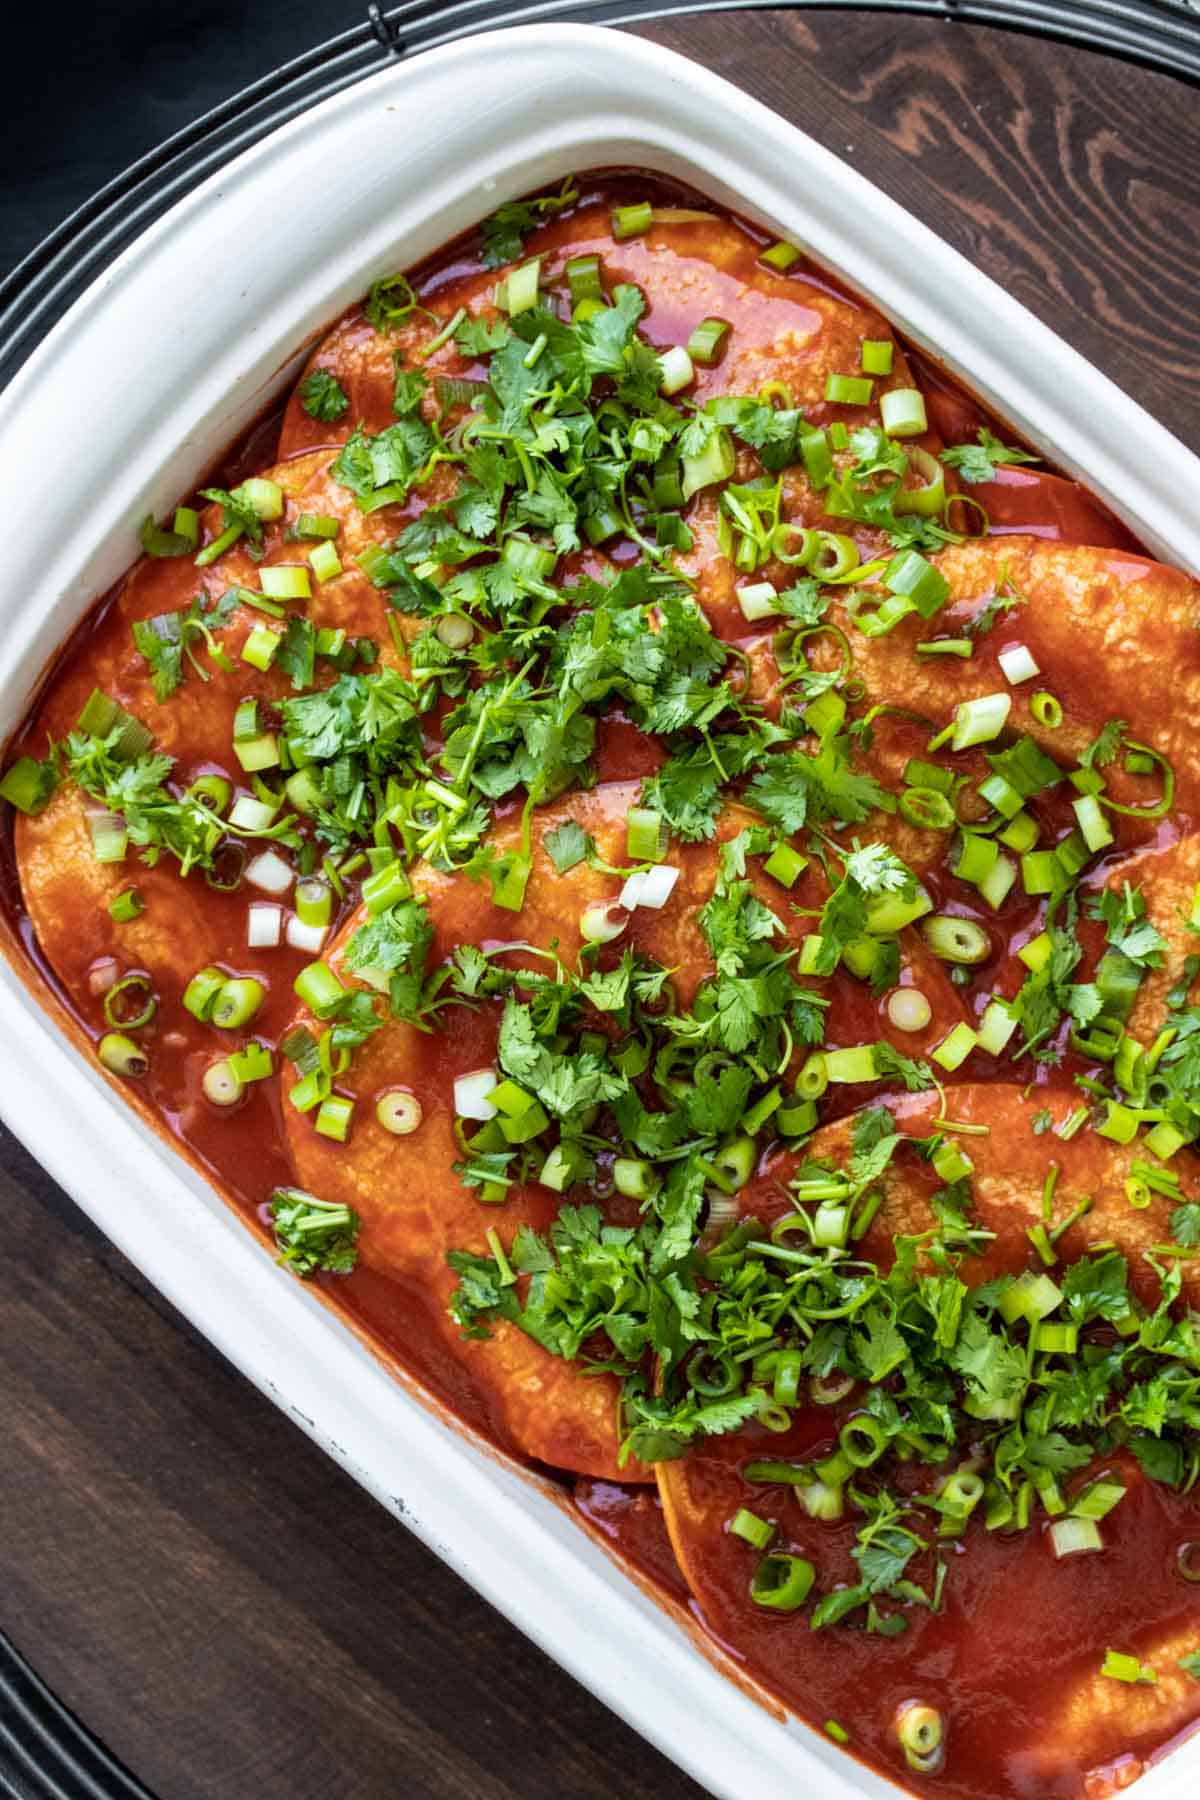 Top view of layered enchiladas in a white baking dish with red sauce and green onions.